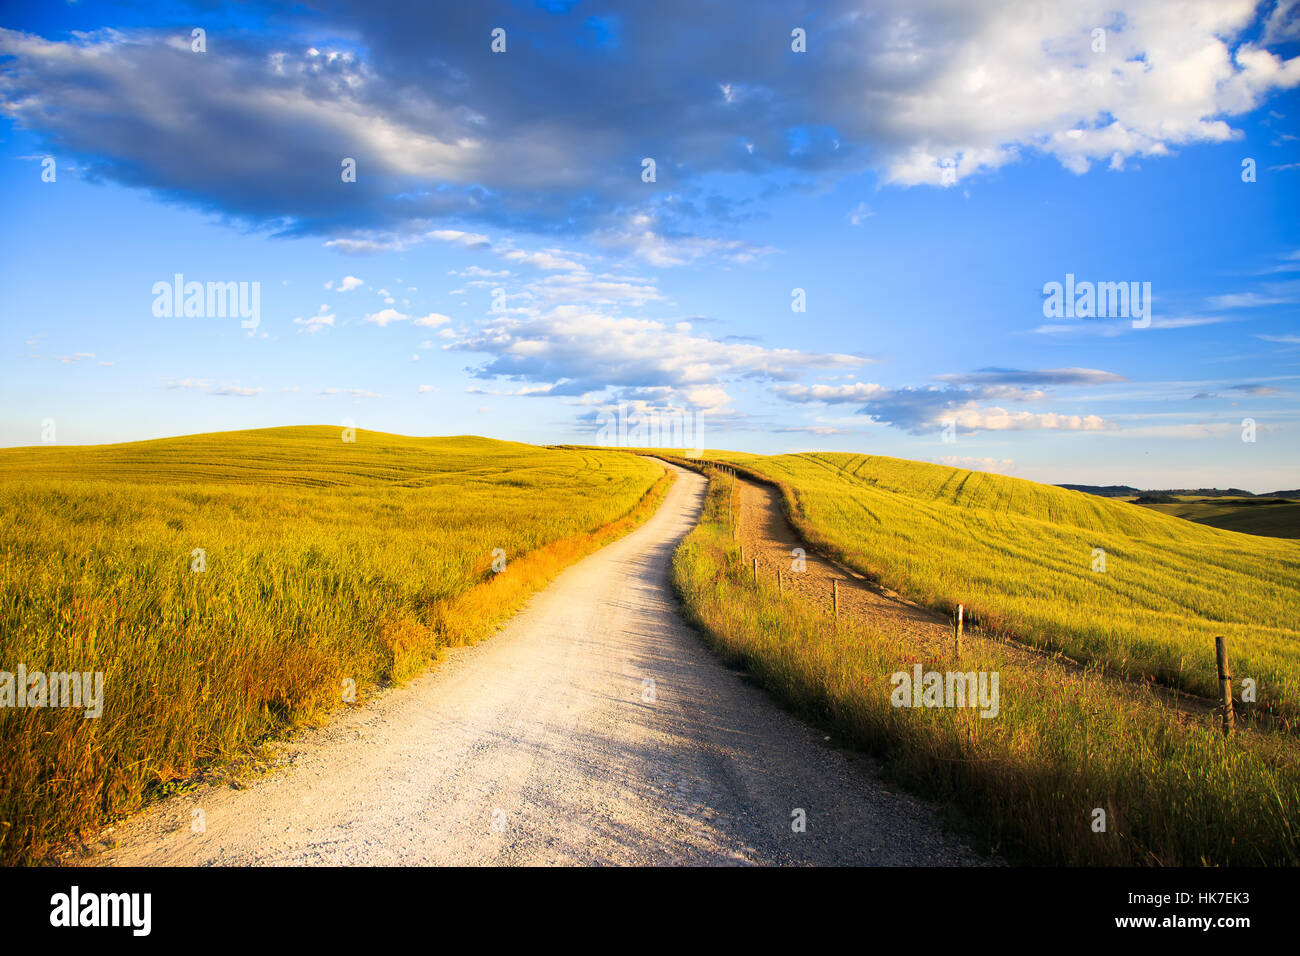 White road on rolling hill and wheat field in a rural landscape. Val d Orcia land near Siena, Tuscany, Italy, Europe. Stock Photo